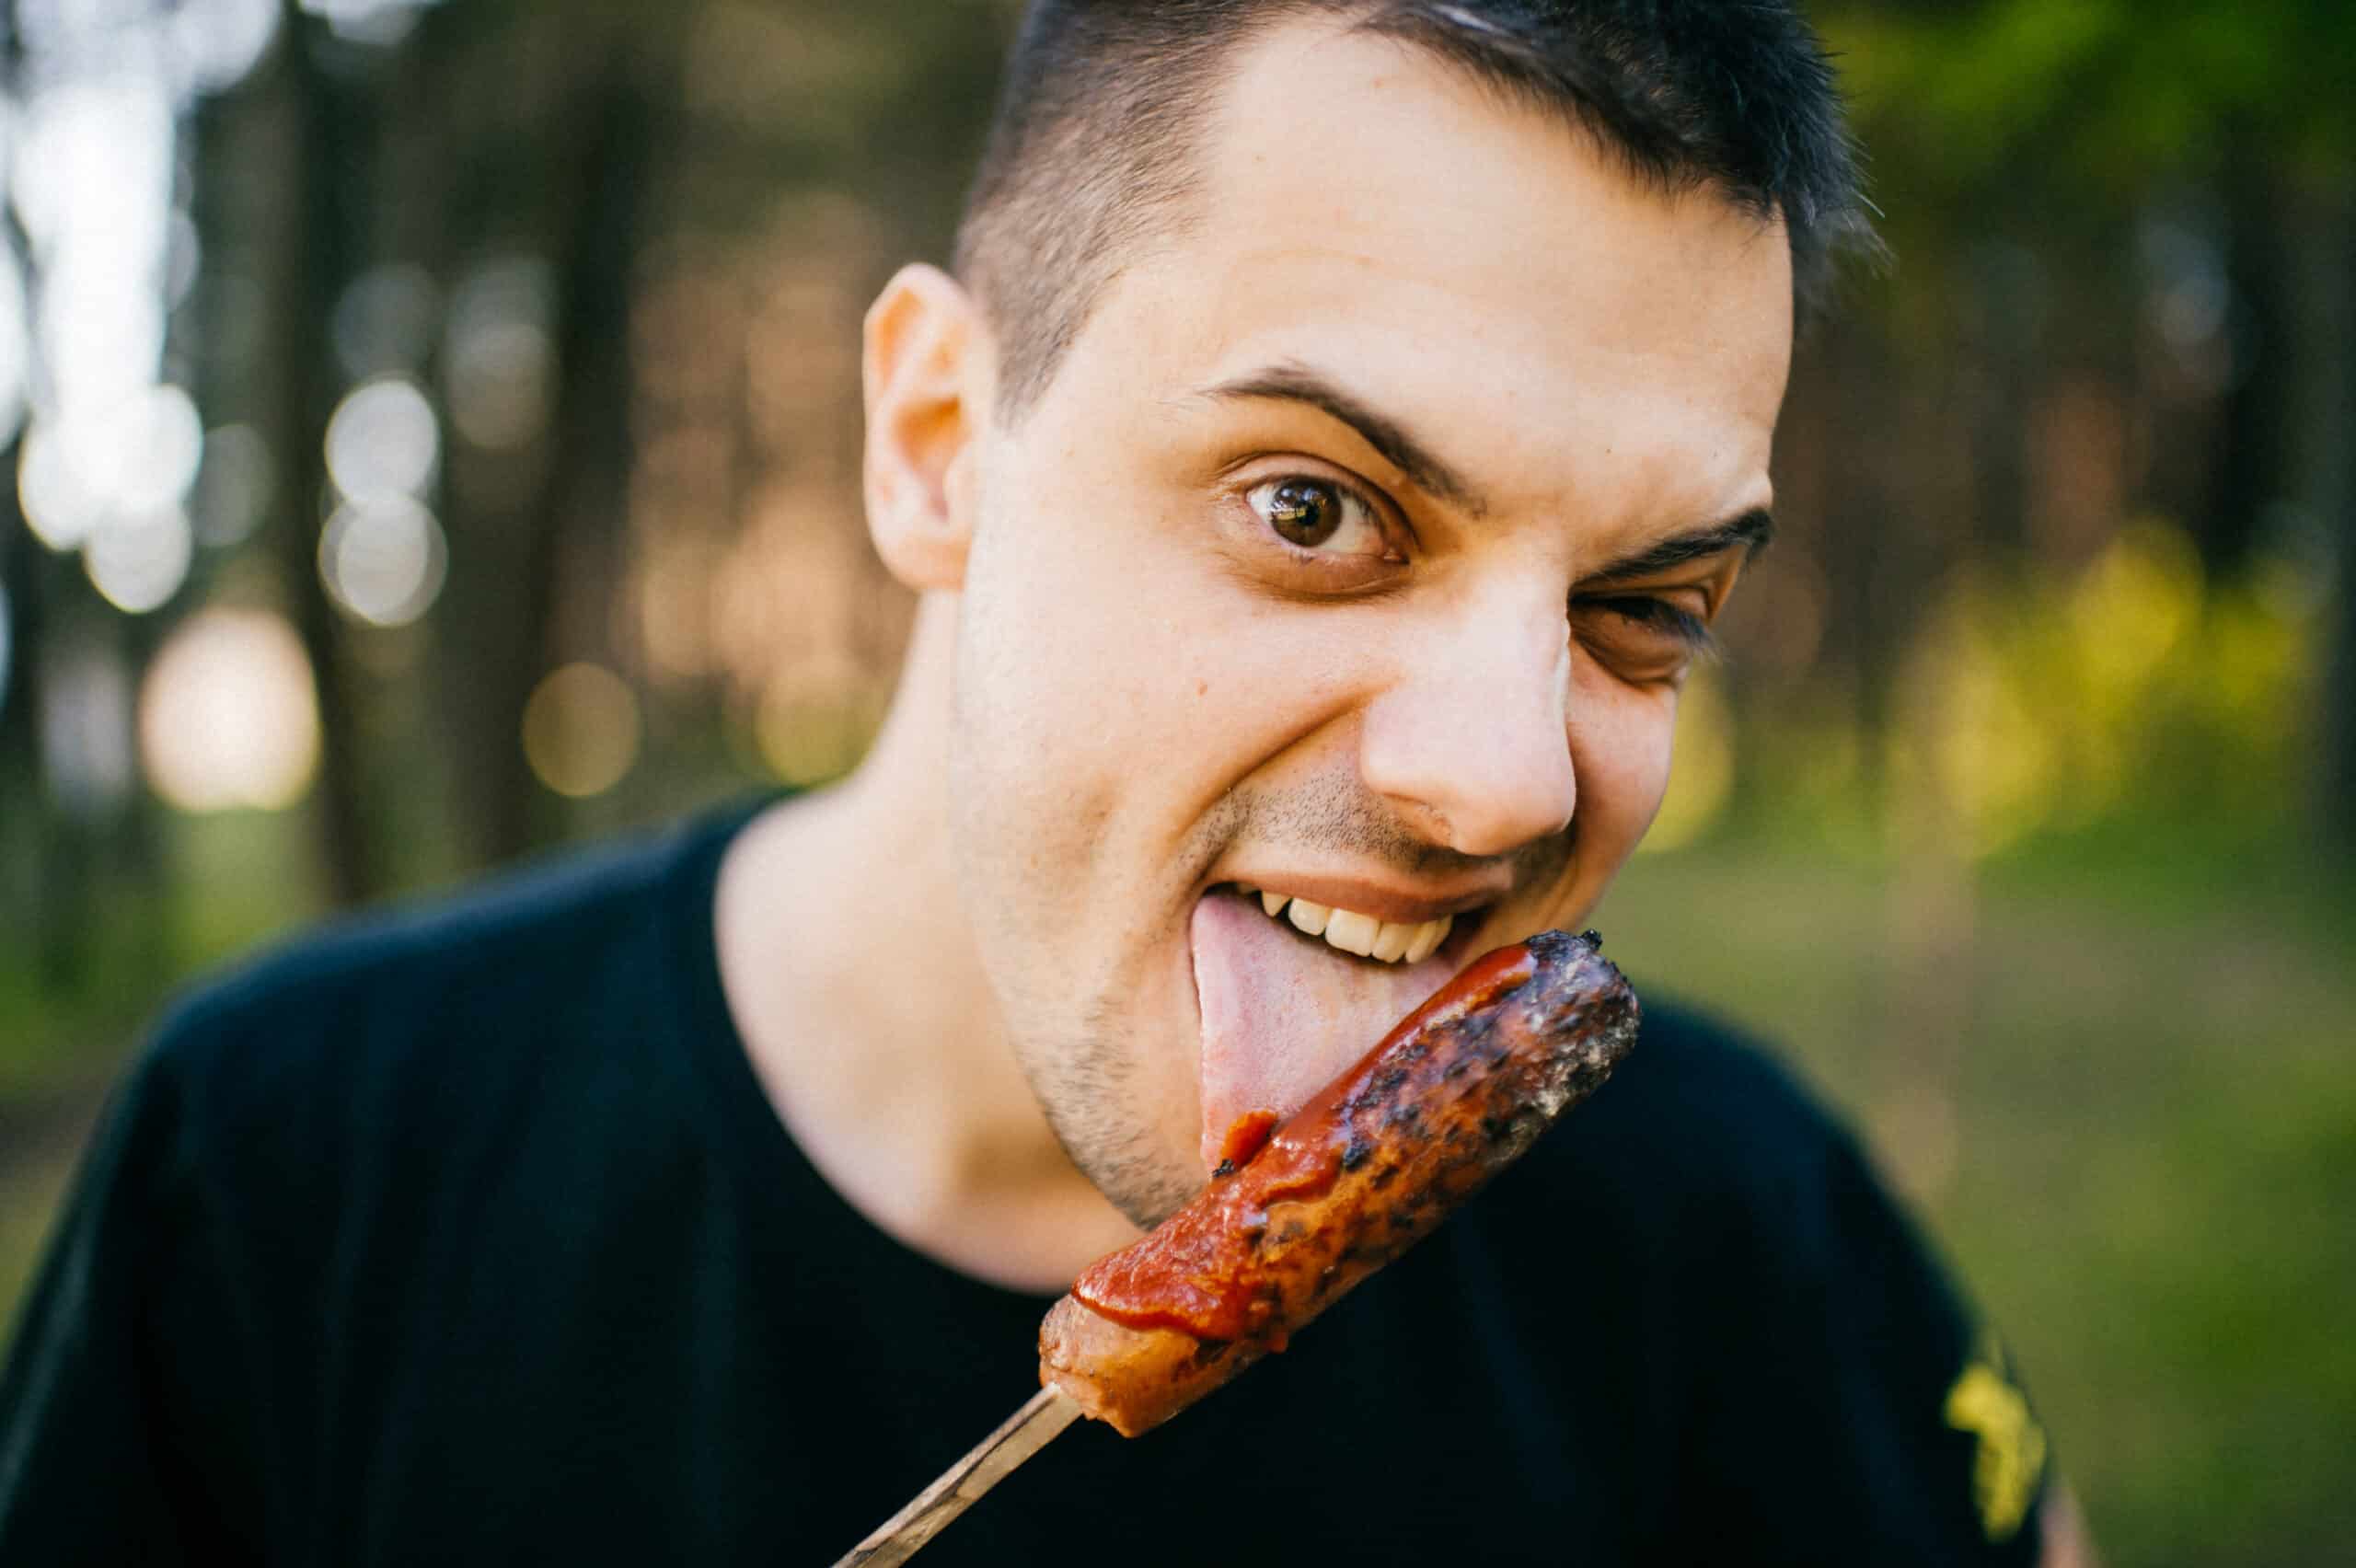 Closeup portrait of male licking and biting roasted sausage with disgusting ugly monstrous facial expression. Meat lover. Sinister evil diabolical face. Bum with maniacal eyes. Depth of filed. Funny